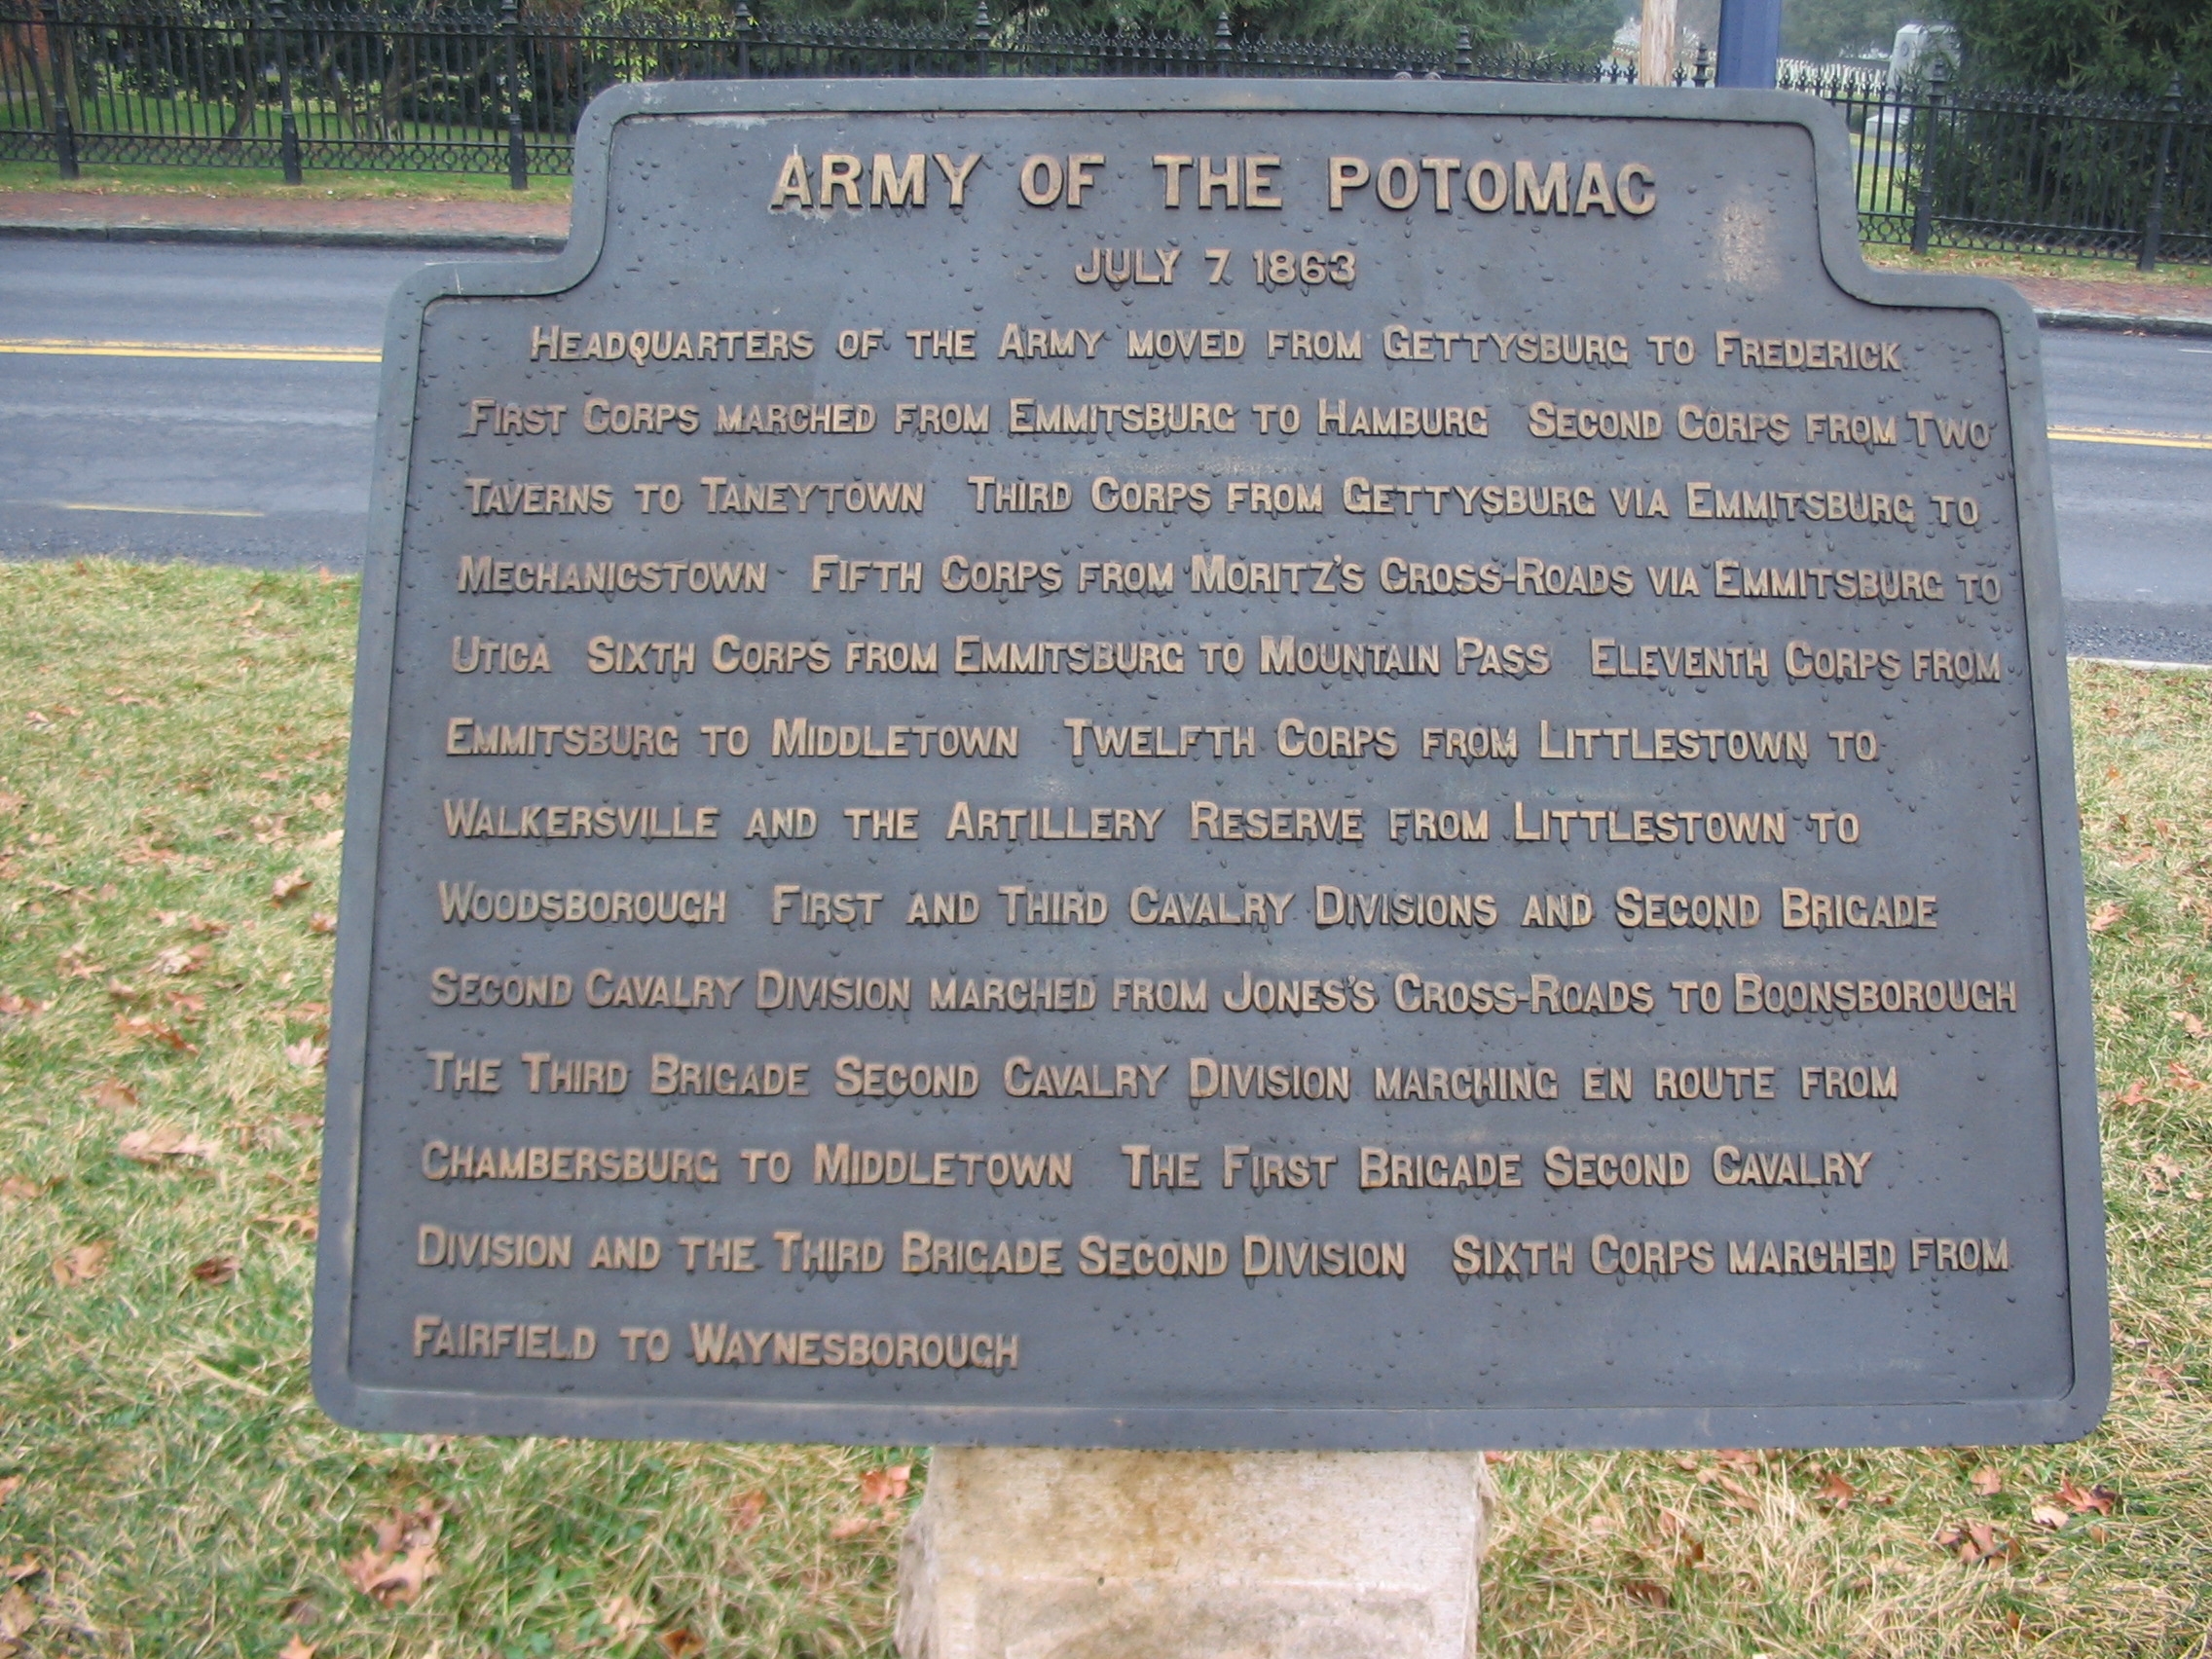 Army of the Potomac - July 7, 1863 Itinerary Tablet